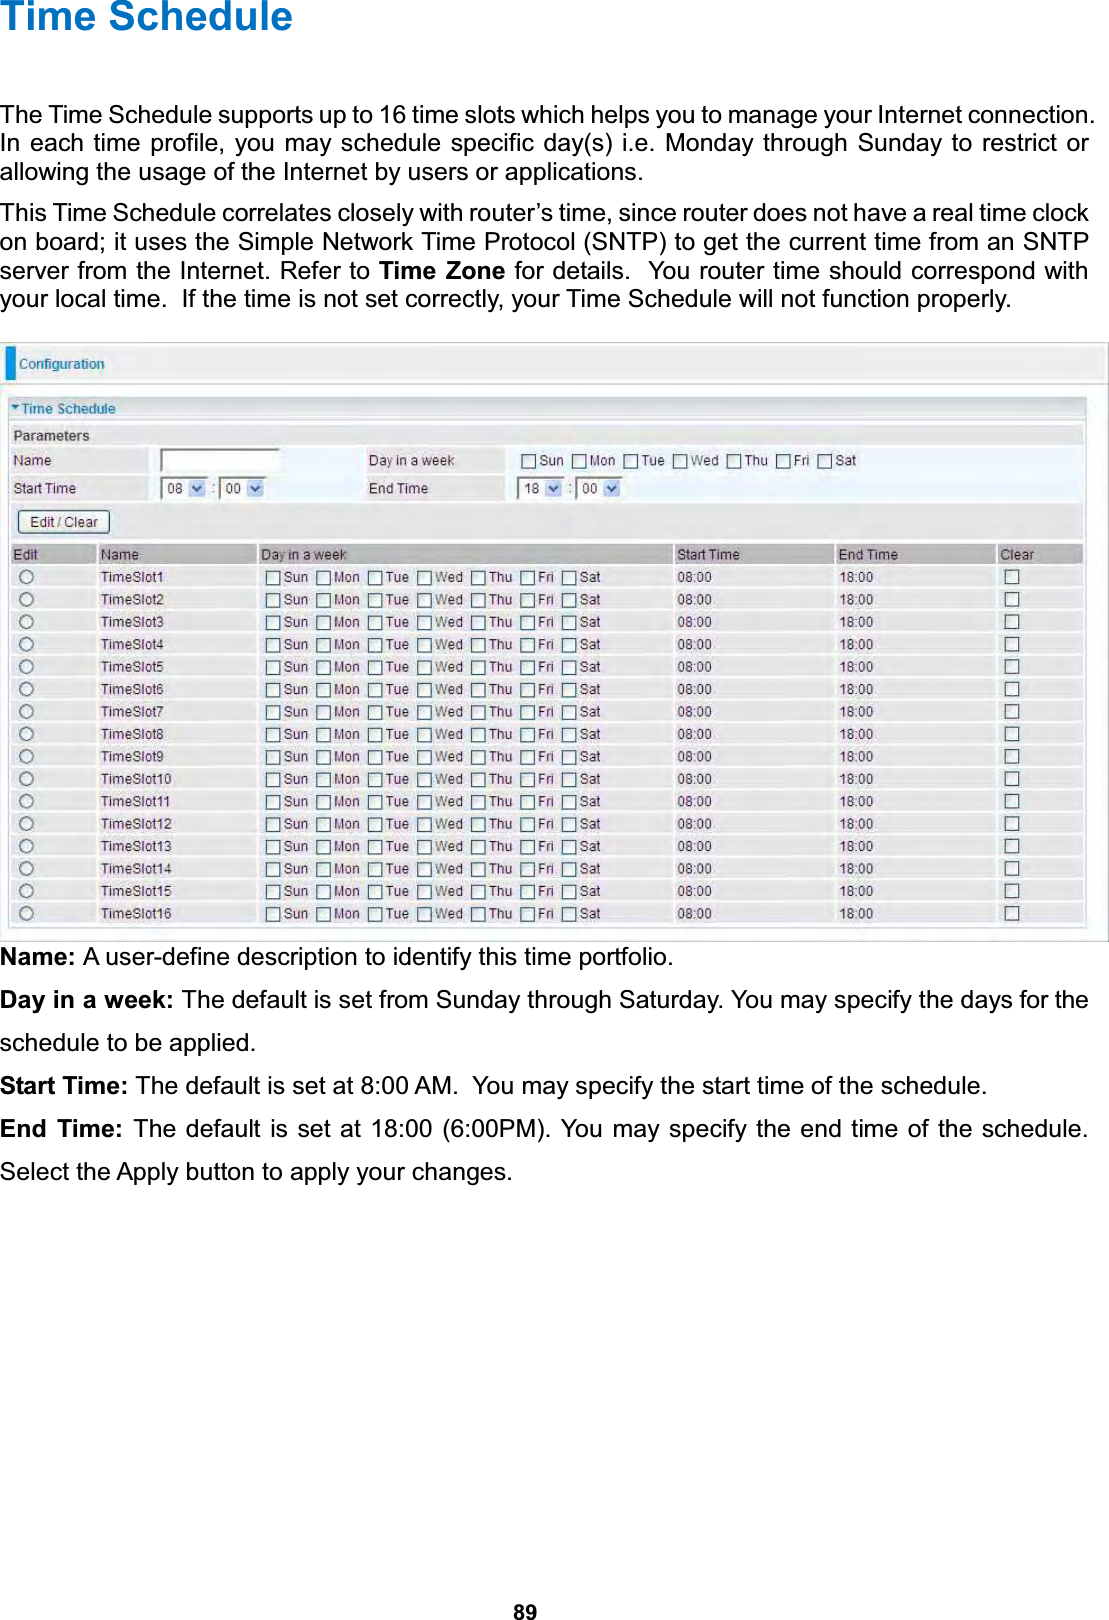  89 Time Schedule The Time Schedule supports up to 16 time slots which helps you to manage your Internet connection.  In each time profile, you may schedule specific day(s) i.e. Monday through Sunday to restrict or allowing the usage of the Internet by users or applications.   This Time Schedule correlates closely with router’s time, since router does not have a real time clock on board; it uses the Simple Network Time Protocol (SNTP) to get the current time from an SNTP server from the Internet. Refer to Time Zone for details.  You router time should correspond with your local time.  If the time is not set correctly, your Time Schedule will not function properly.   Name: A user-define description to identify this time portfolio. Day in a week: The default is set from Sunday through Saturday. You may specify the days for the schedule to be applied. Start Time: The default is set at 8:00 AM.  You may specify the start time of the schedule. End Time: The default is set at 18:00 (6:00PM). You may specify the end time of the schedule. Select the Apply button to apply your changes.  